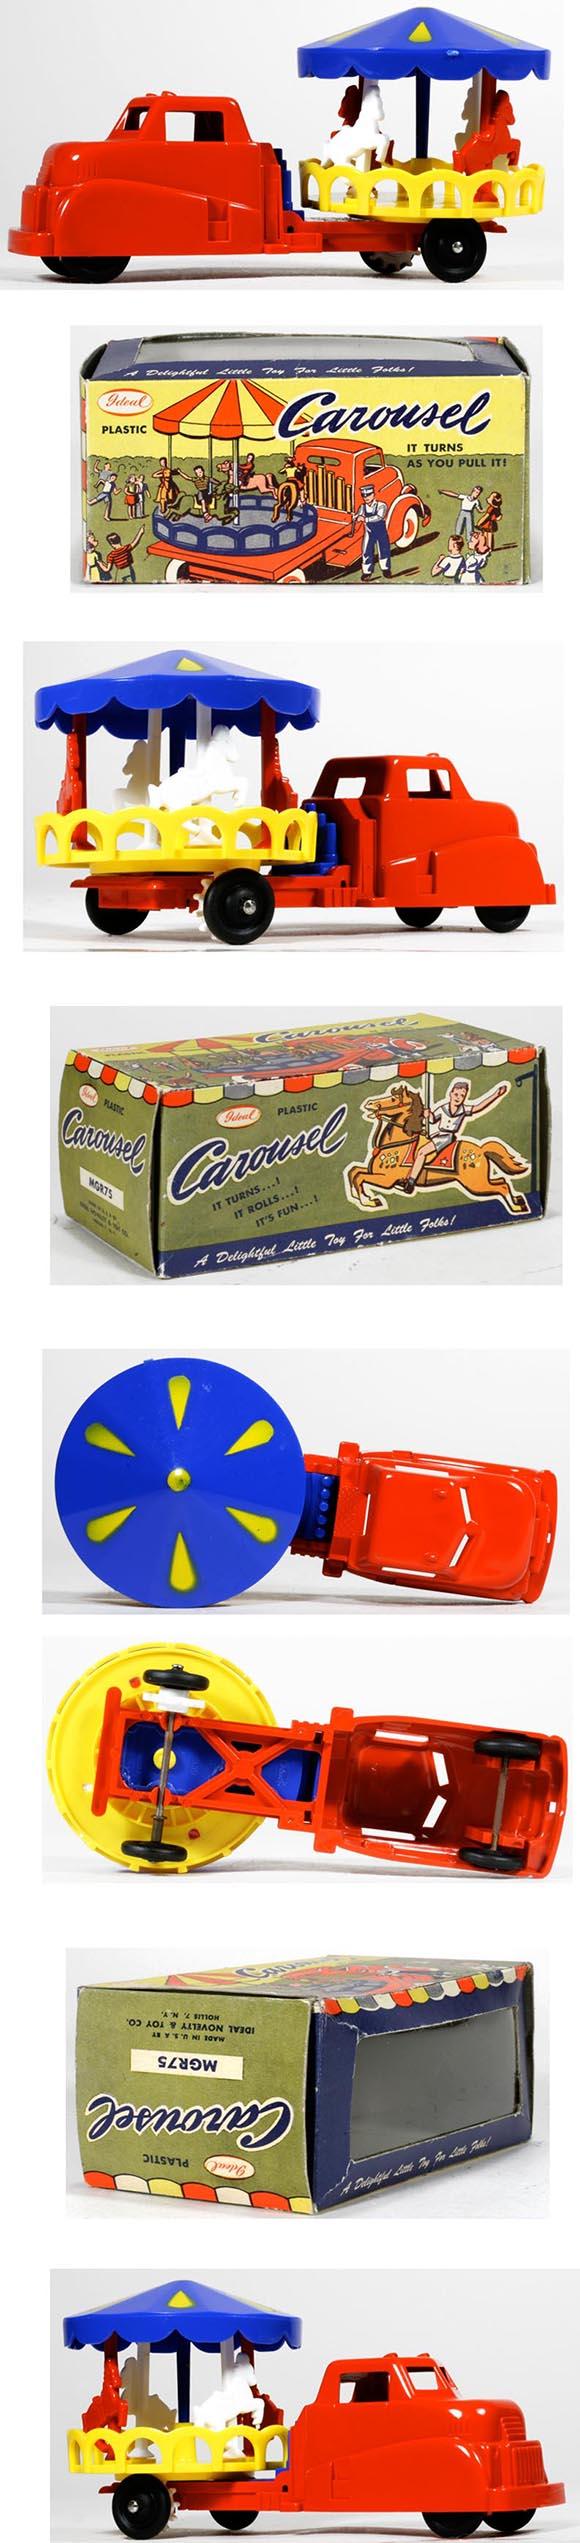 1949 Ideal Novelty & Toy Co., Carousel Truck in Original Box